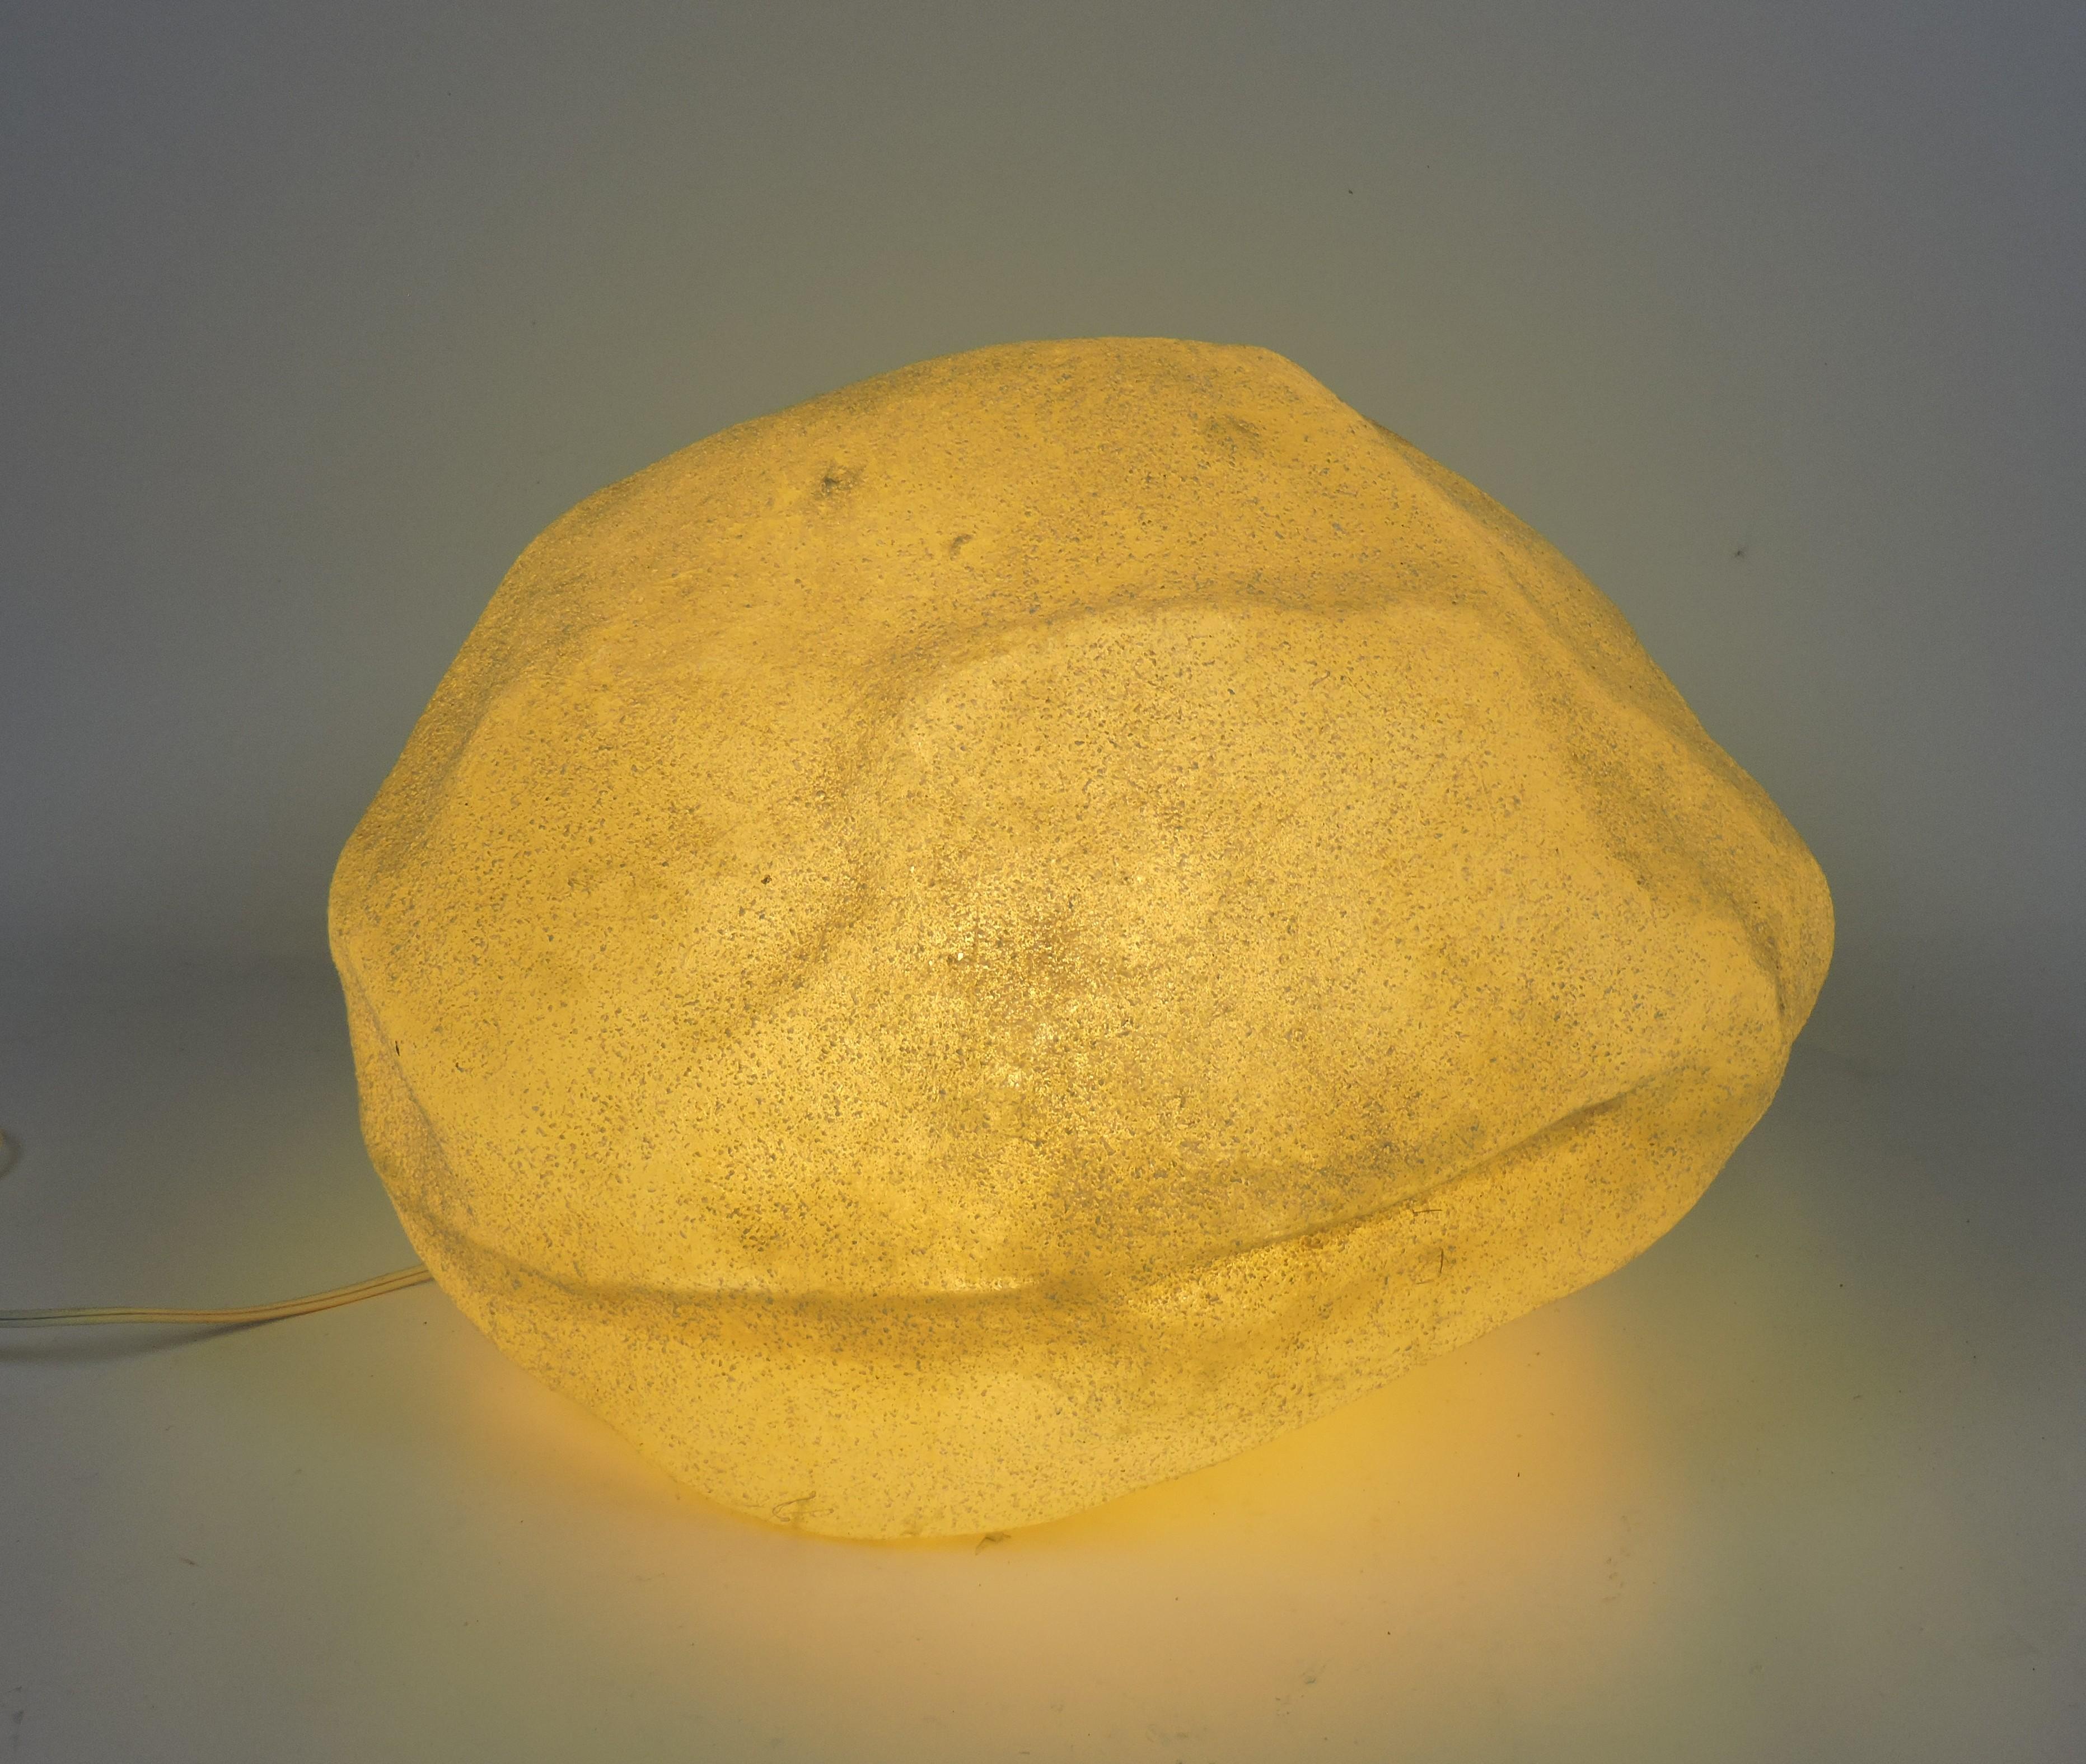 Very cool luminescent moon rock designed by Andre Cazenave and manufactured in Italy by Singleton in the 1970s. This lamp is made of translucent resin with marble powder inclusions and glows with a soft ambient light when lit. This is the second